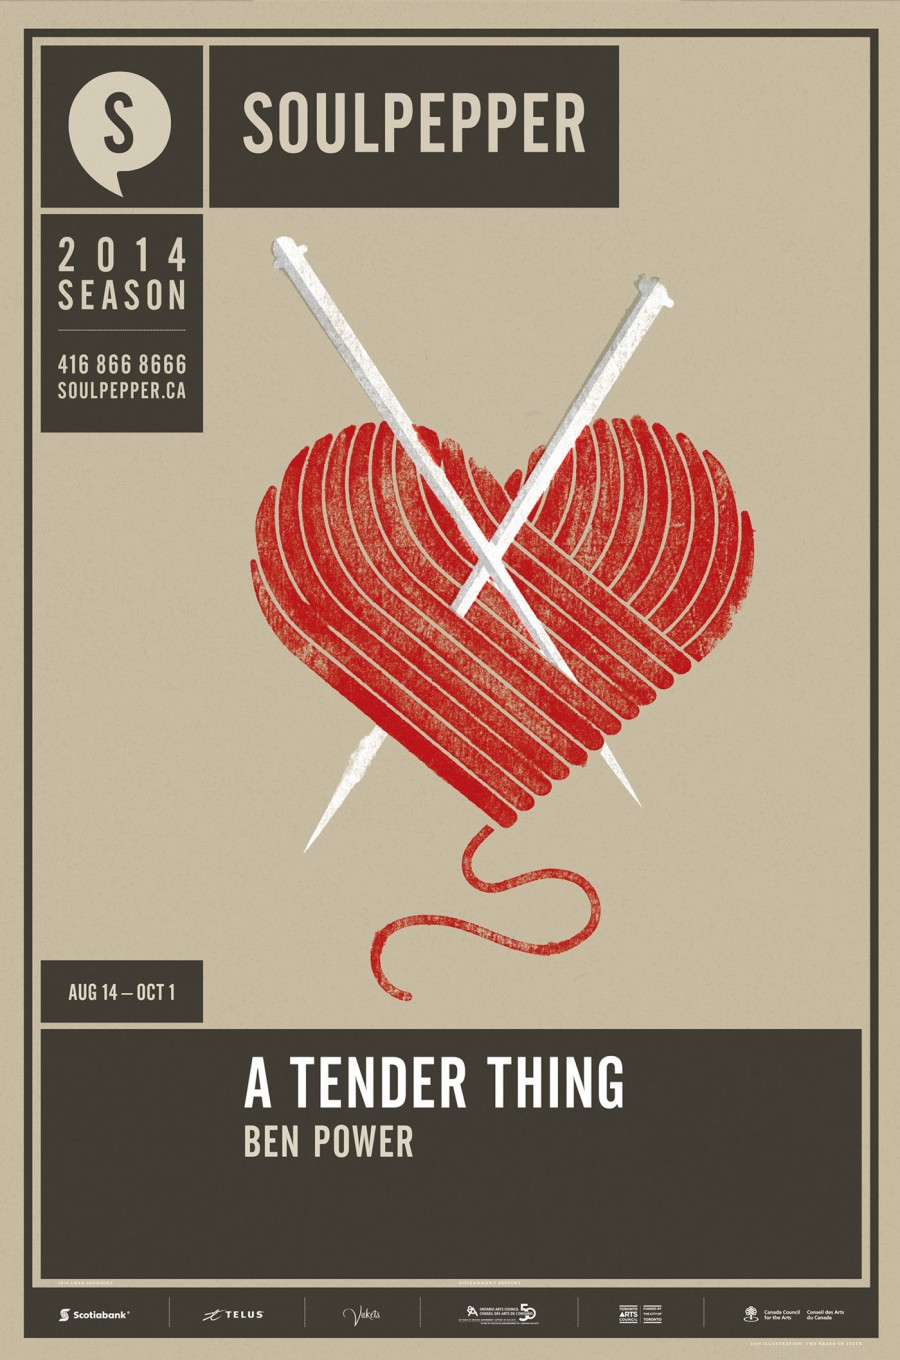 A Tender Thing - Soulpepper Theatre - 2014 Season Poster Series - The Heads of State